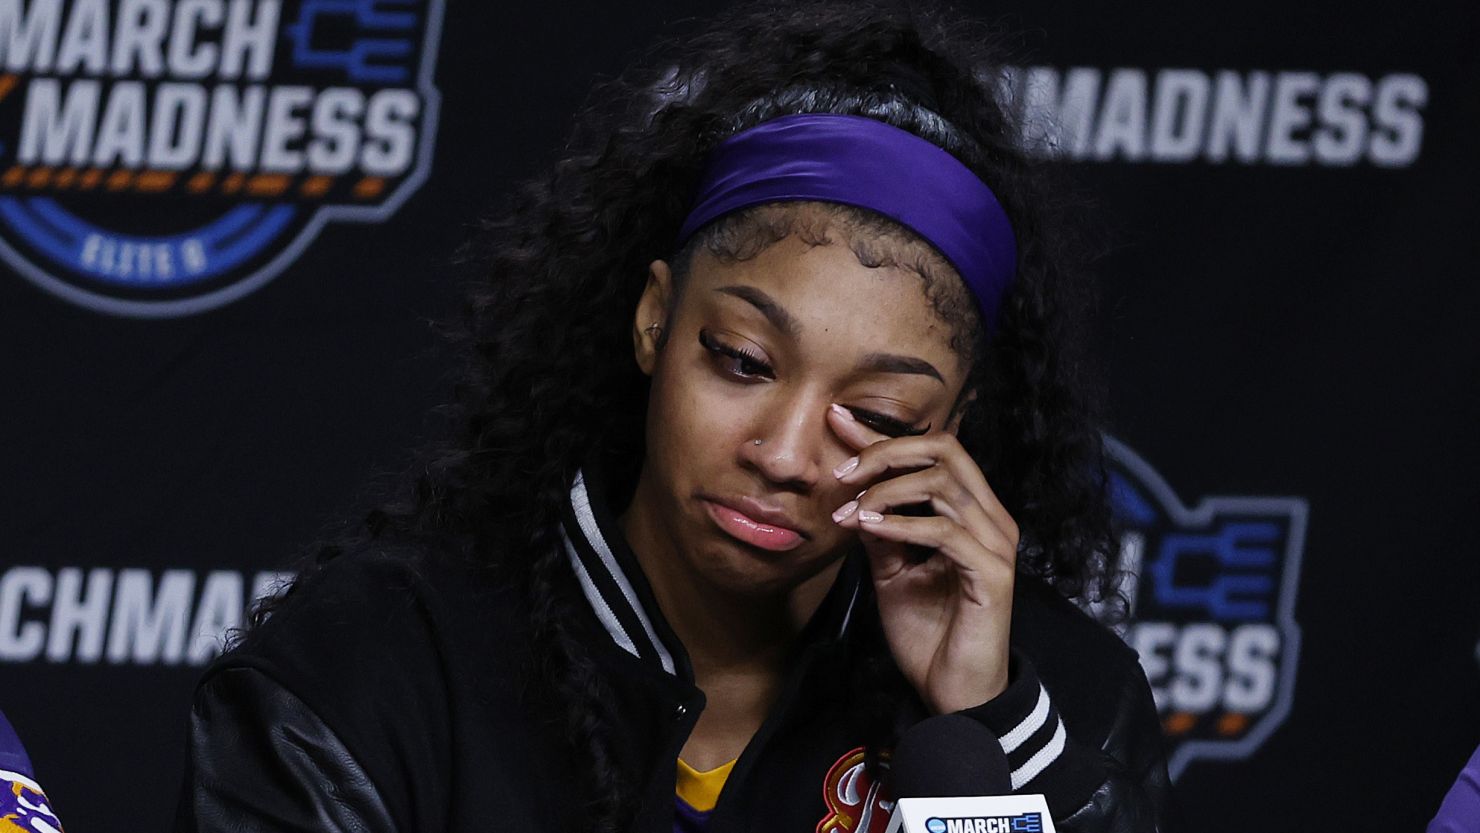 EMOTIONAL:Chicago Sky rookie Angel Reese breaks down in tears upon learning of her first All-Star selection.